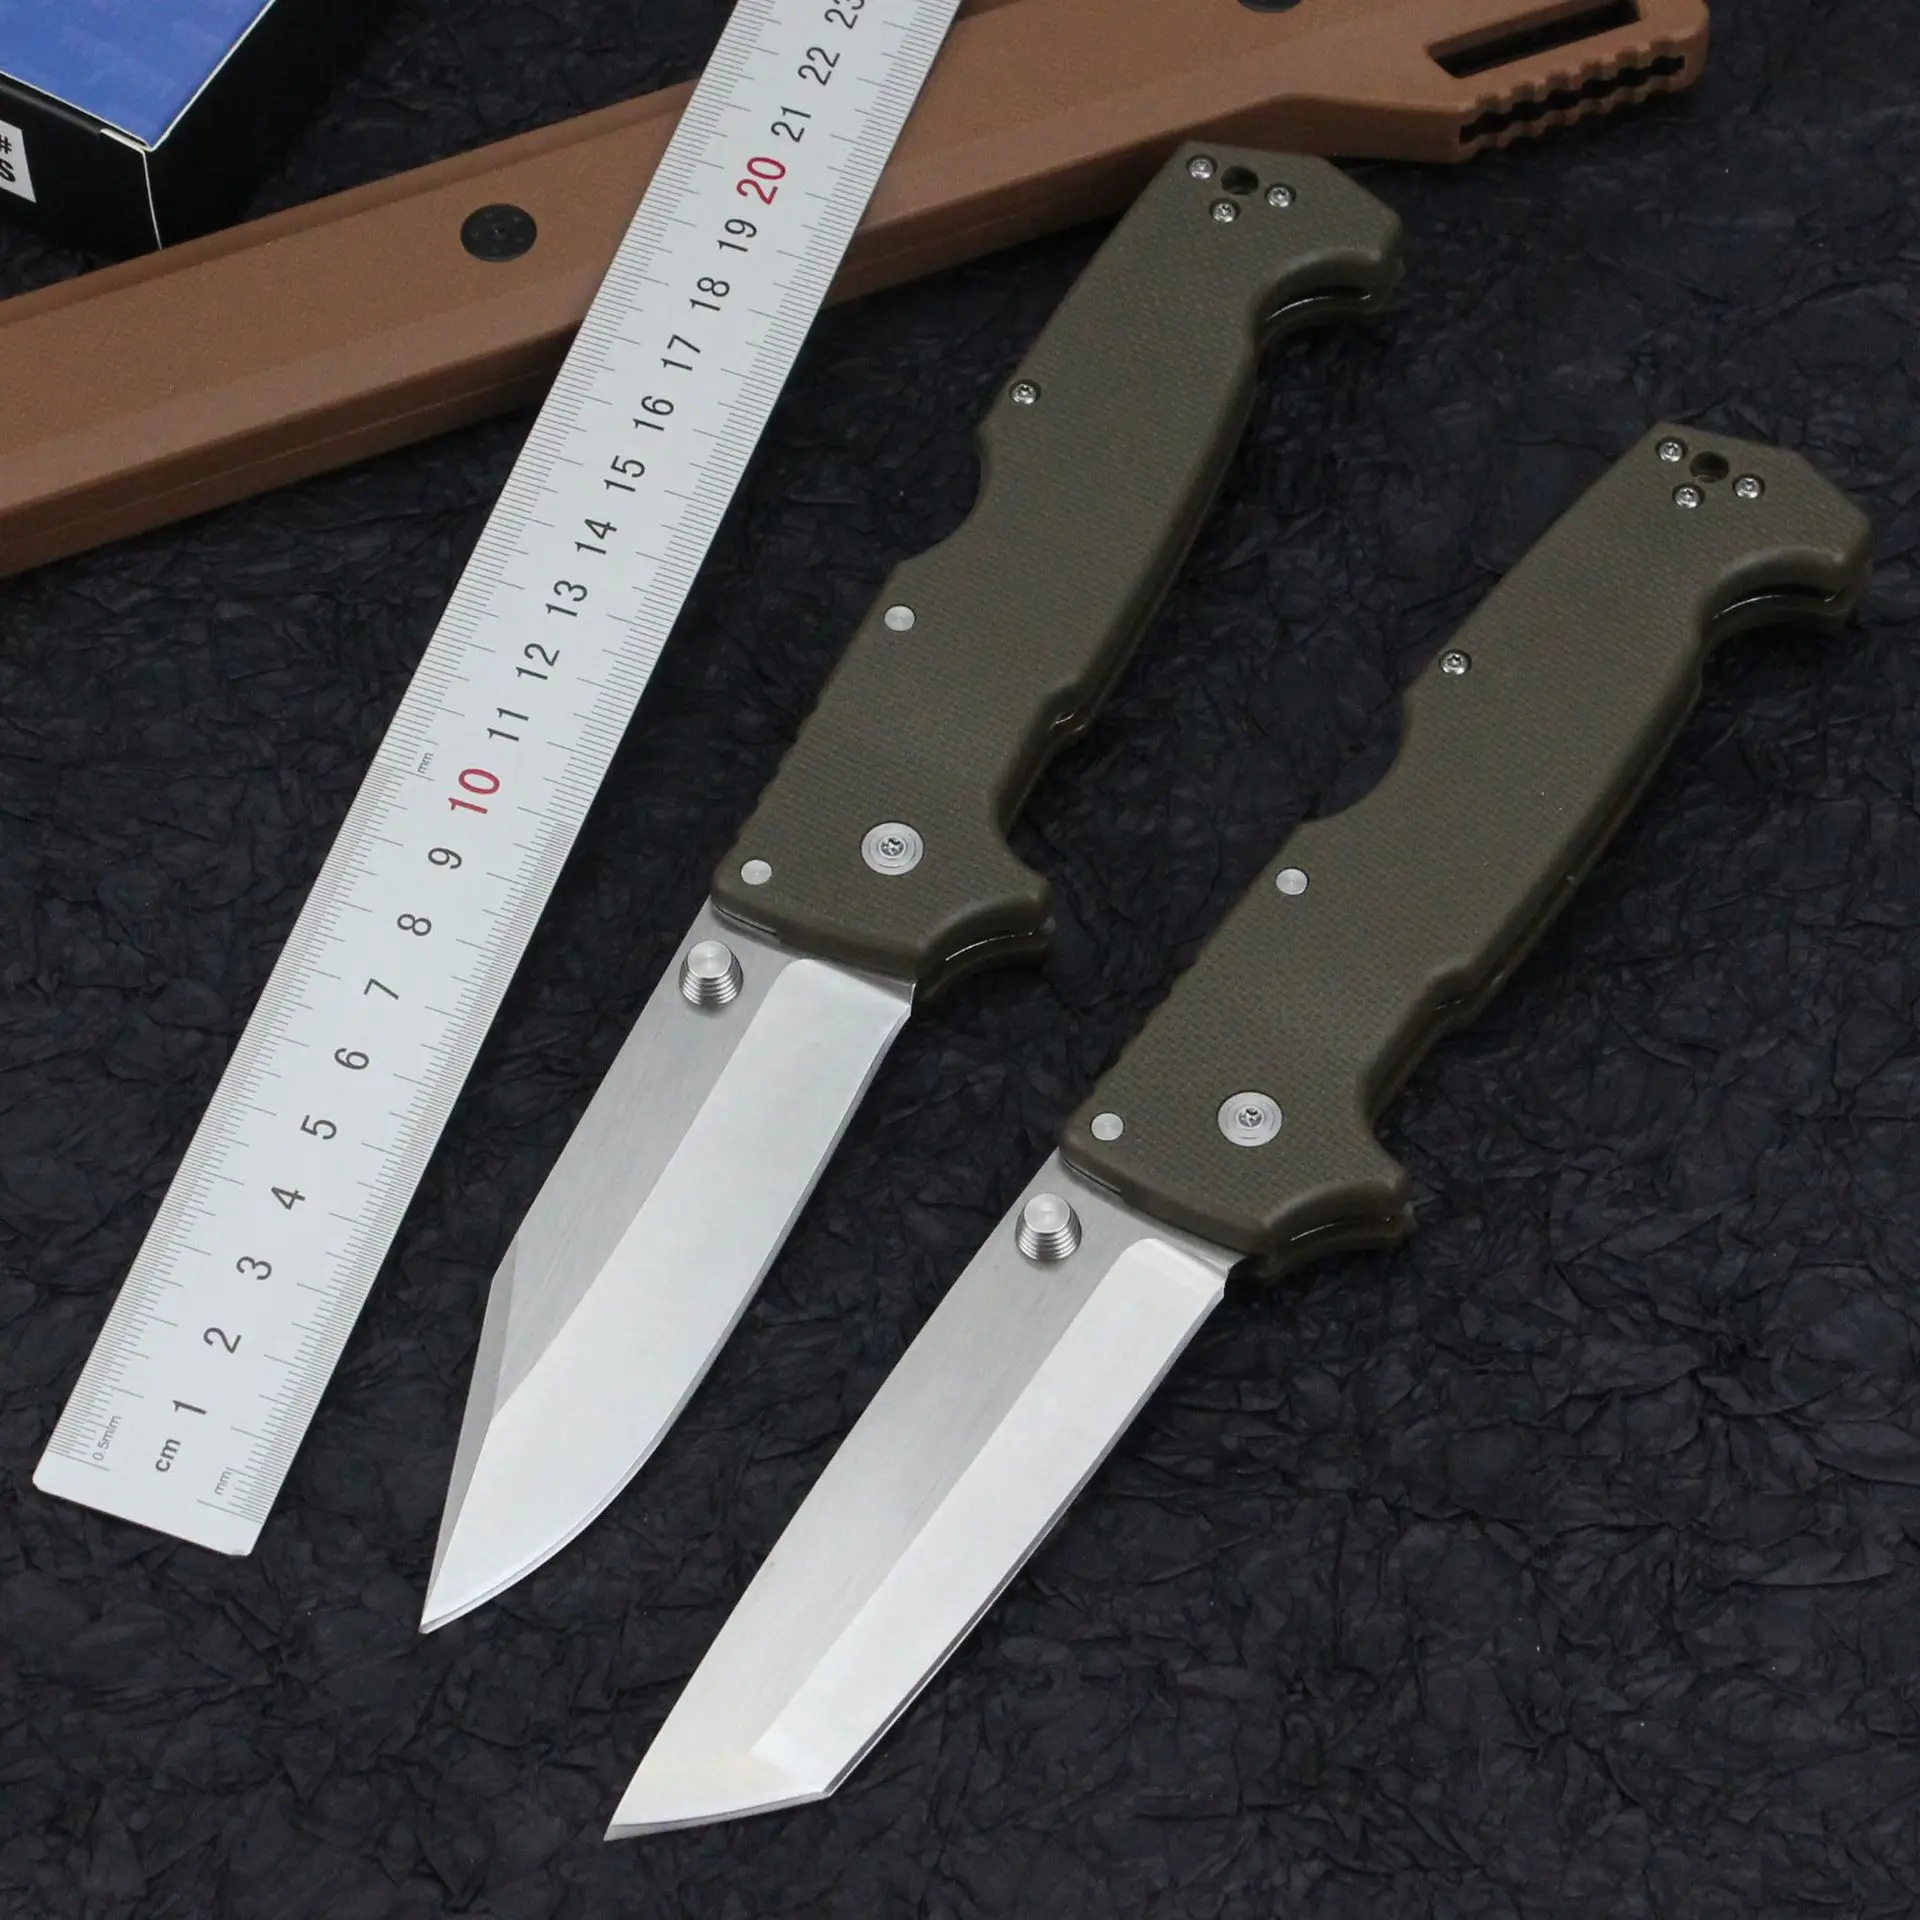 

Cold Steel 62L SR1 Pocket Folding Knife S35VN Blade G10 Handles Tactical Survival Hunting Knives Outdoor Camping Multi EDC Tool